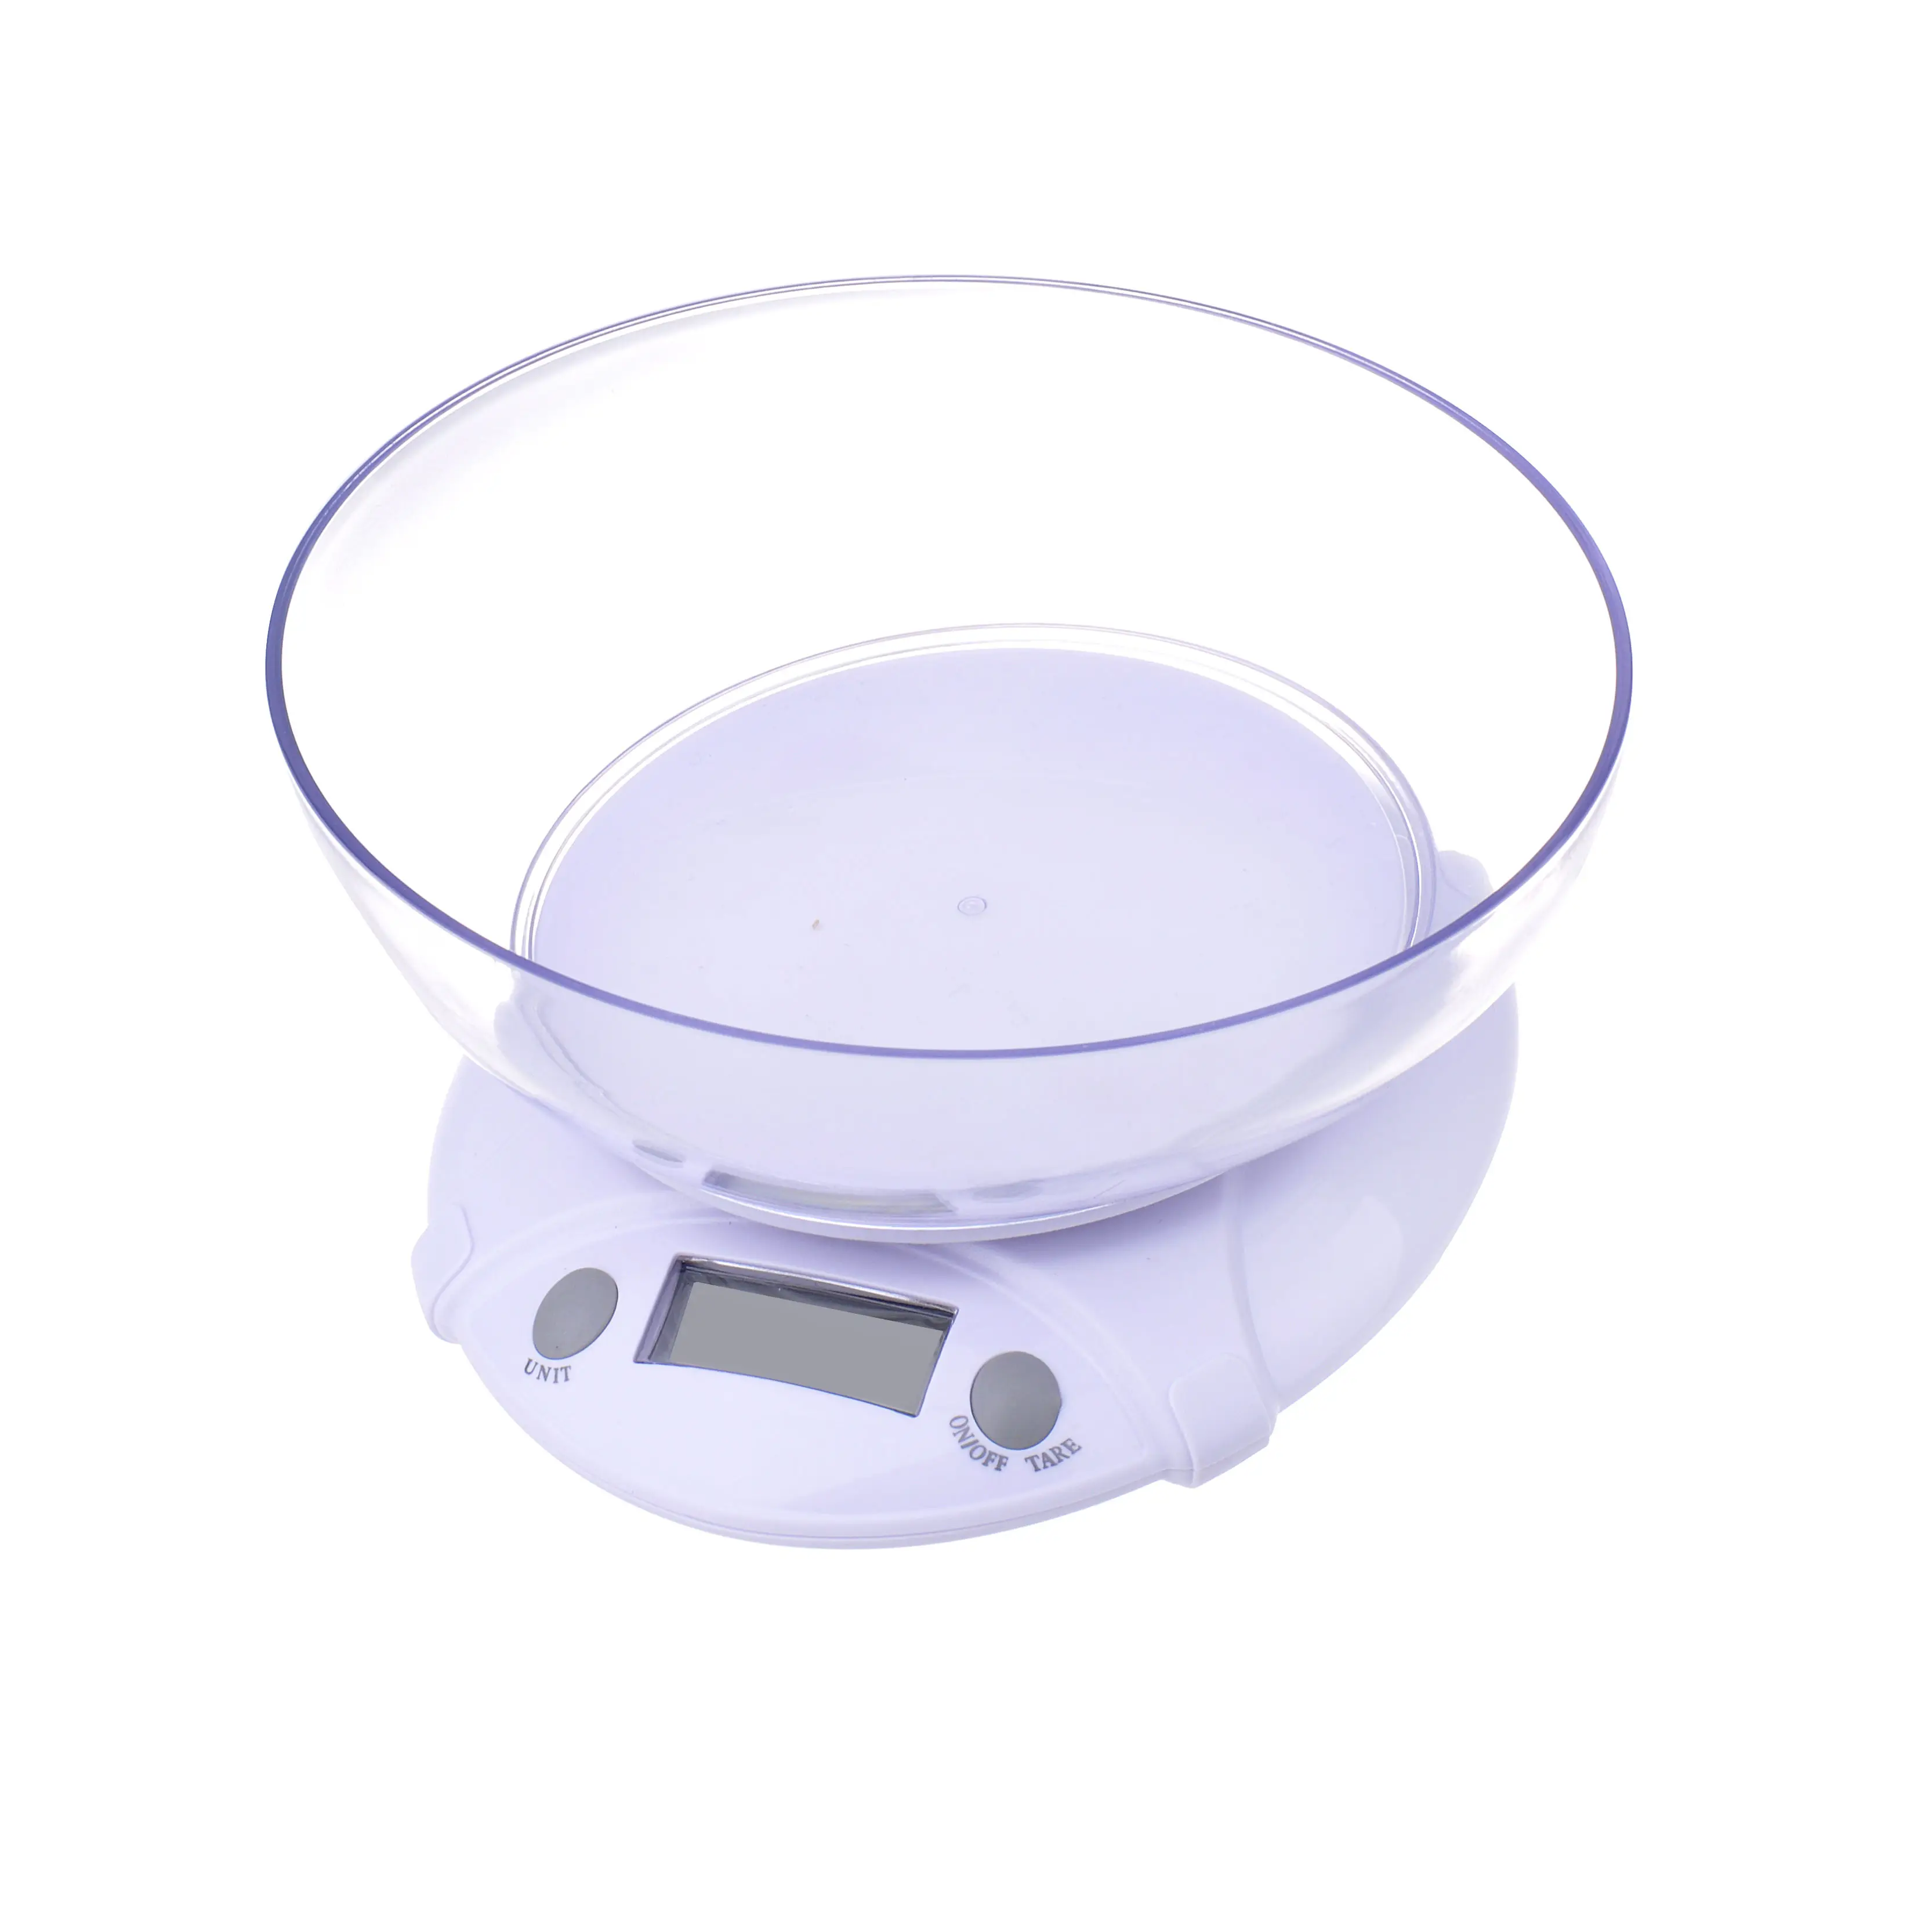 Hot Selling LCD Display 5kg Household Balance Digital Calorie Food Weight Scale with Nutritional Calculator